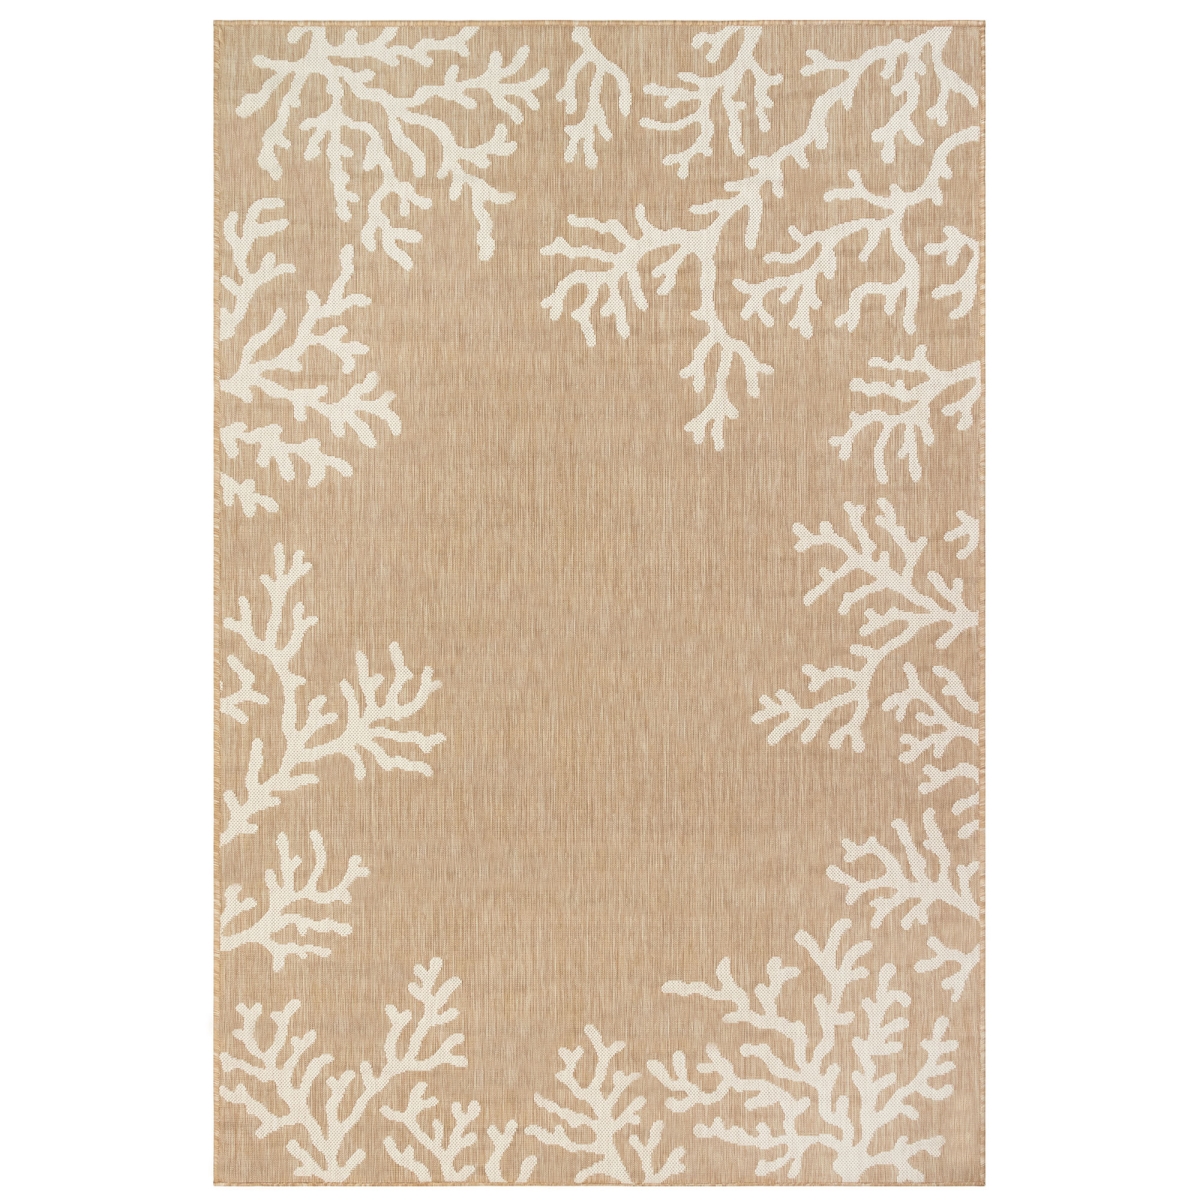 Cre58844812 Liora Manne Carmel Coral Border Indoor & Outdoor Rug, Sand - 4 Ft. 10 In. X 7 Ft. 6 In.